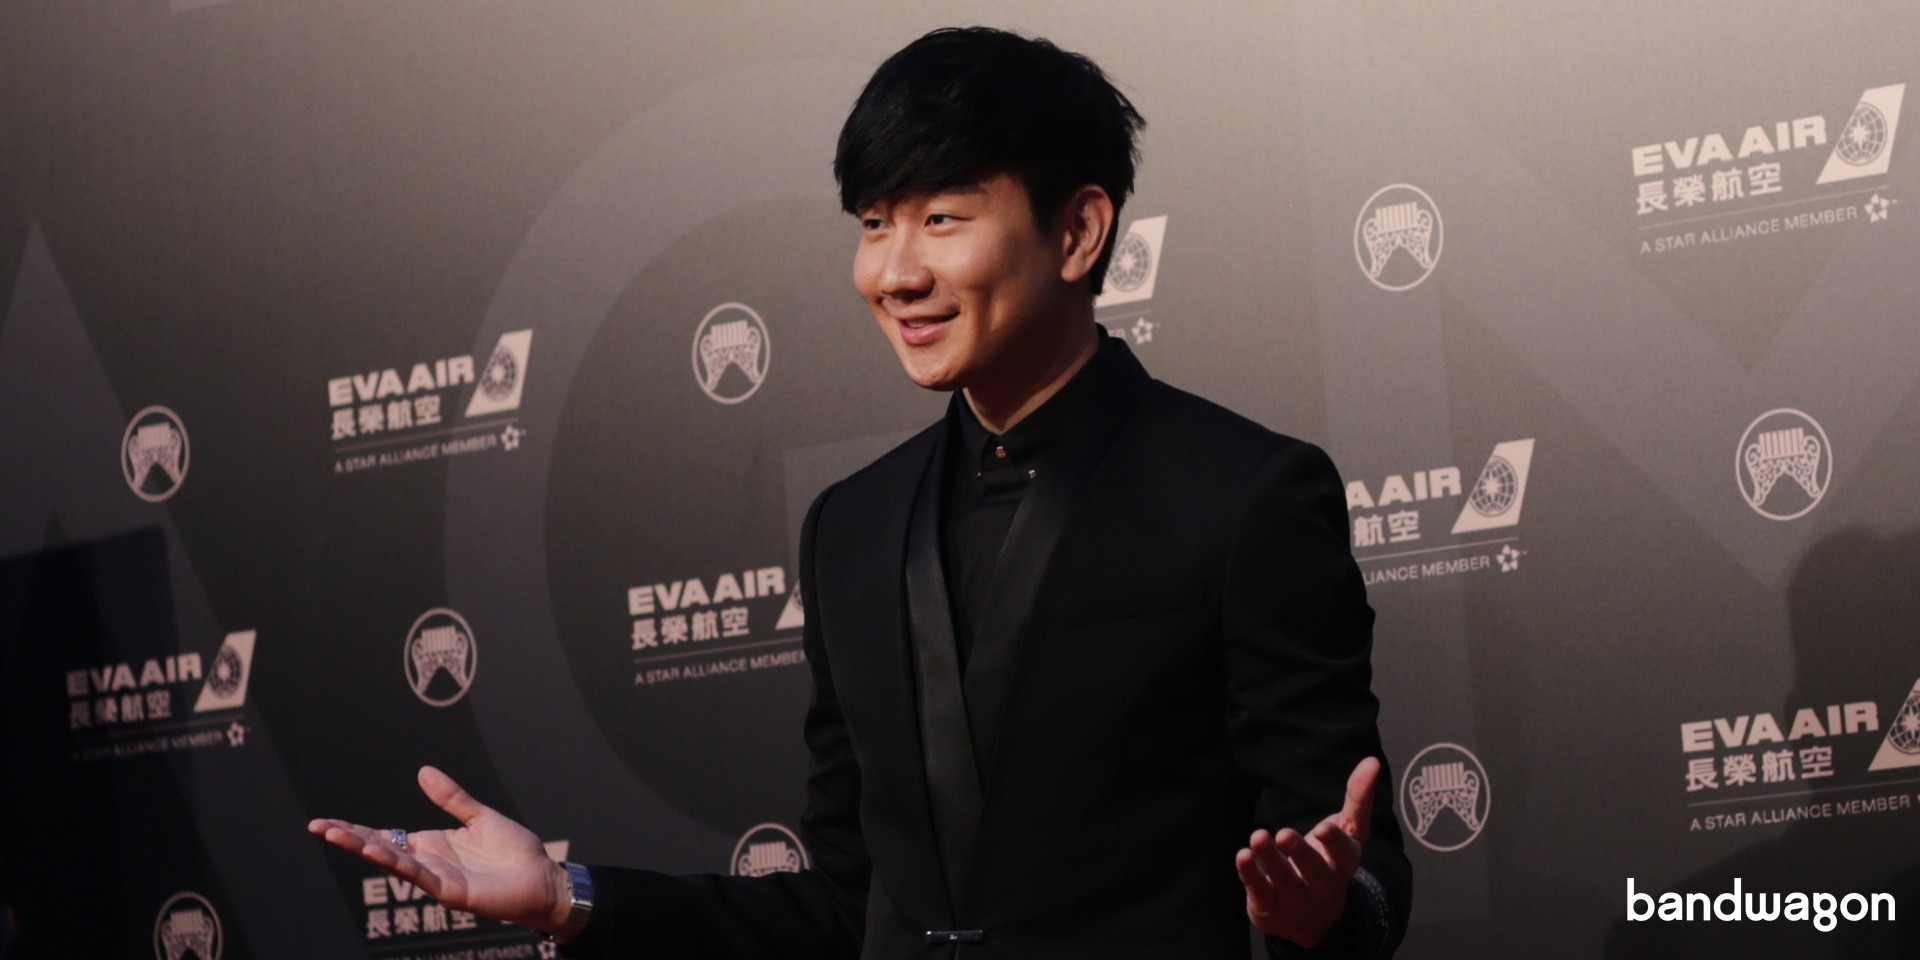 JJ Lin goes home empty-handed at 29th Golden Melody Awards despite six nominations